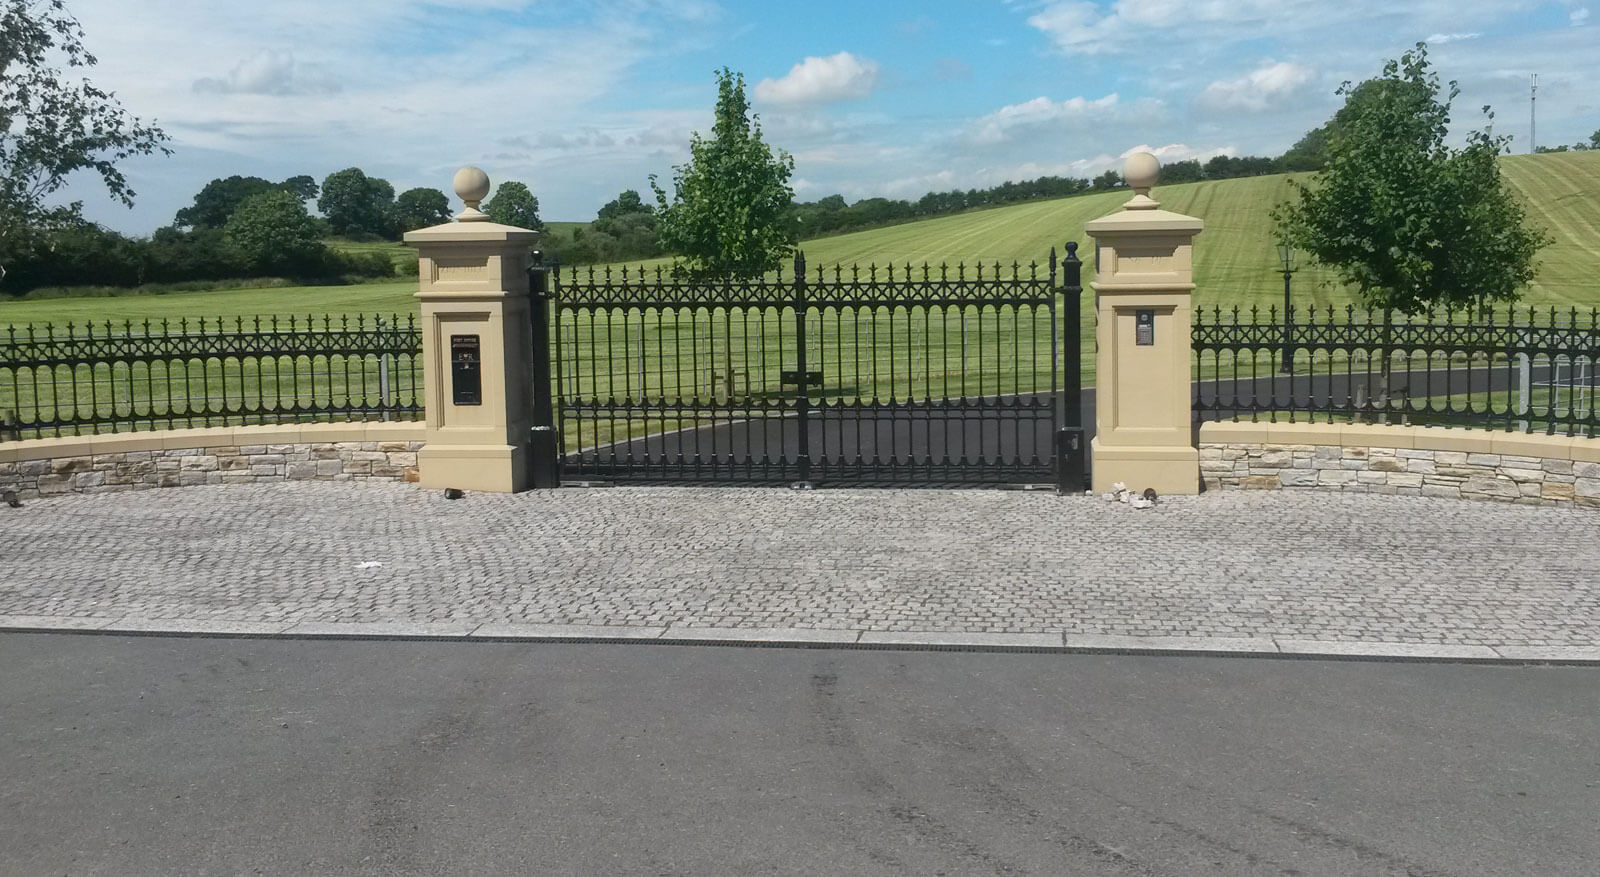 IMPACT: Make a statement with your Cheshire driveway gates